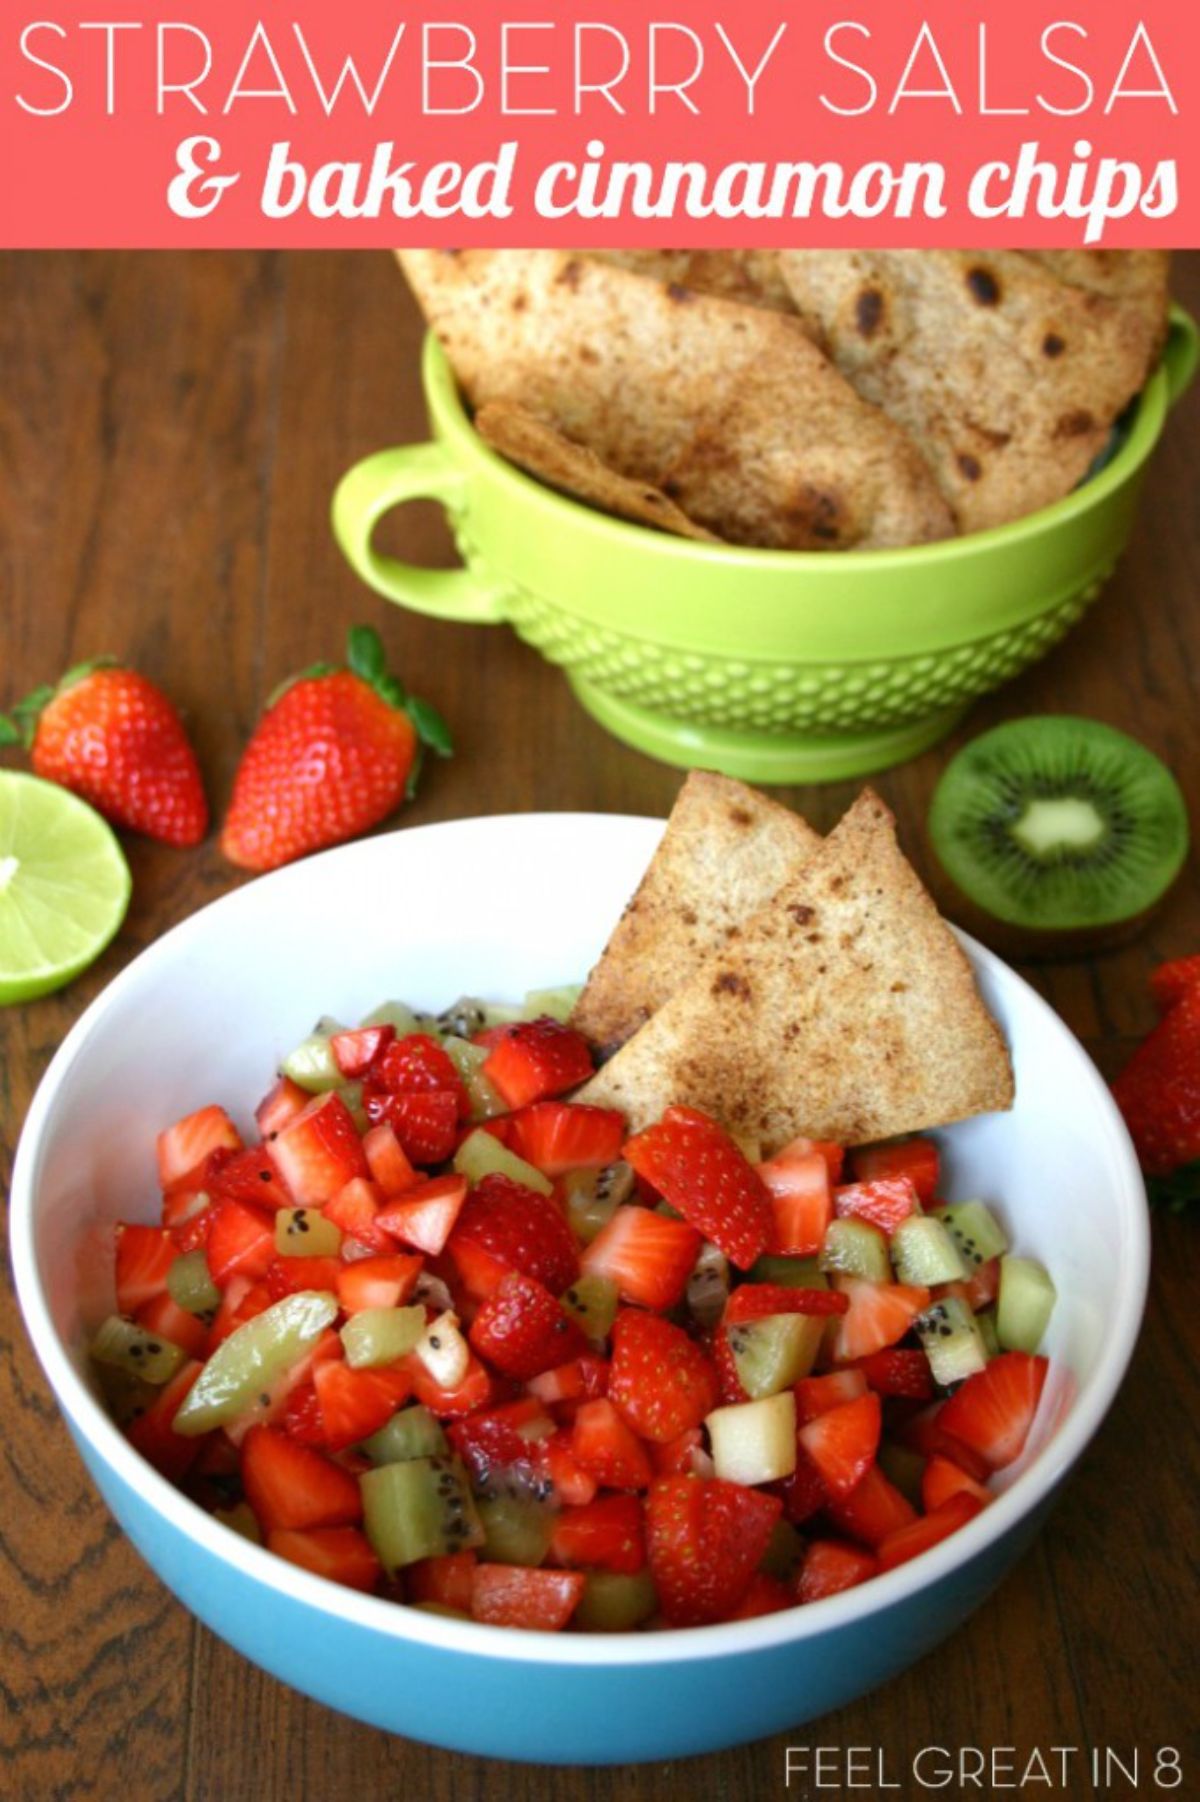 The text reads "Strawberry salsa & baked cinnamon chips". The image is of a blue and white bowl filled with strawberry salsa. Behind it is a green cup filled with baked cinnamon chips